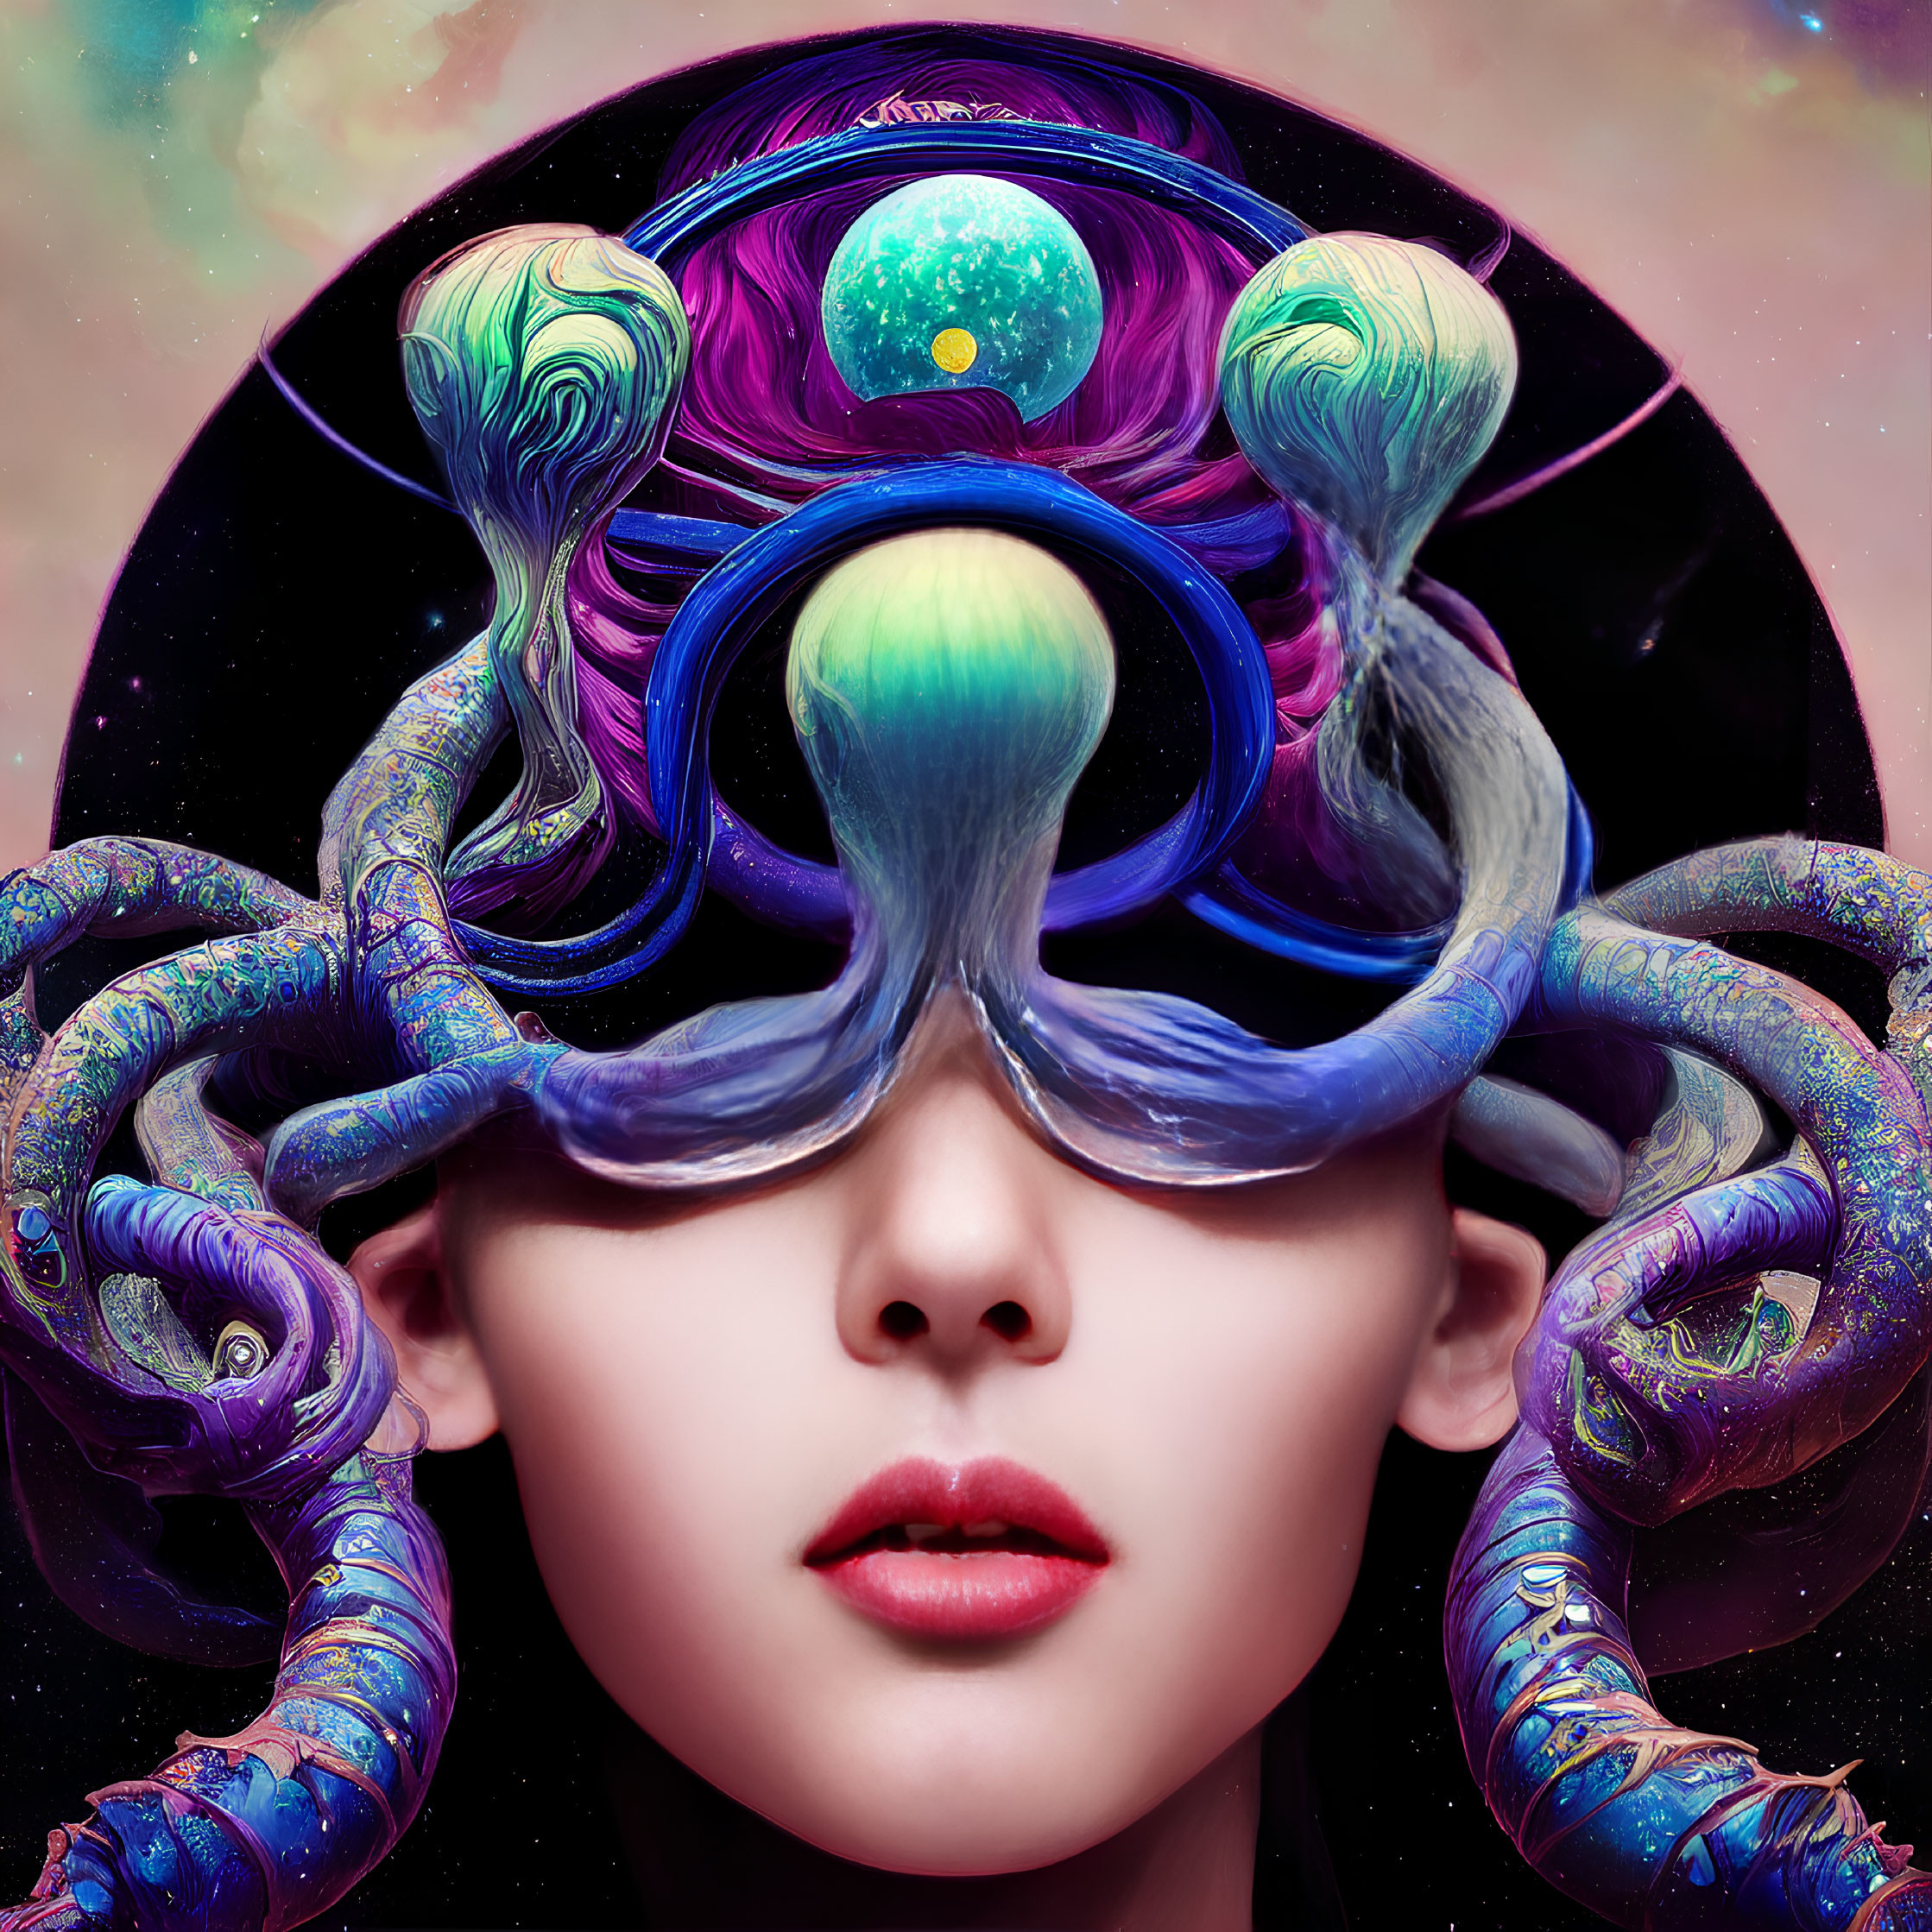 Surreal portrait with tentacle-like hair and cosmic backdrop in circular frame